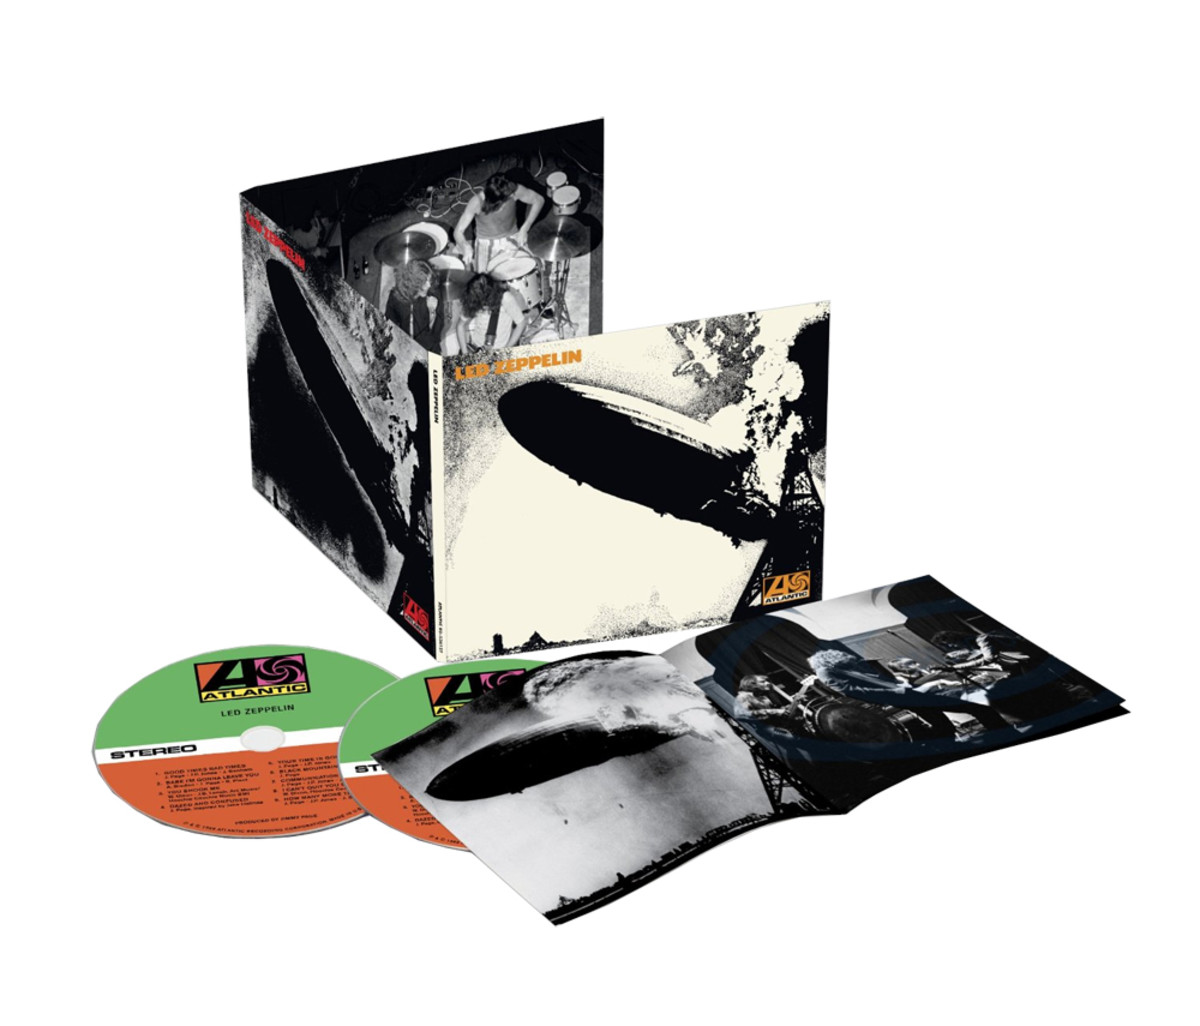 The 2014 edition of Led Zeppelin 1 with the Paris 1969 concert on the second CD.